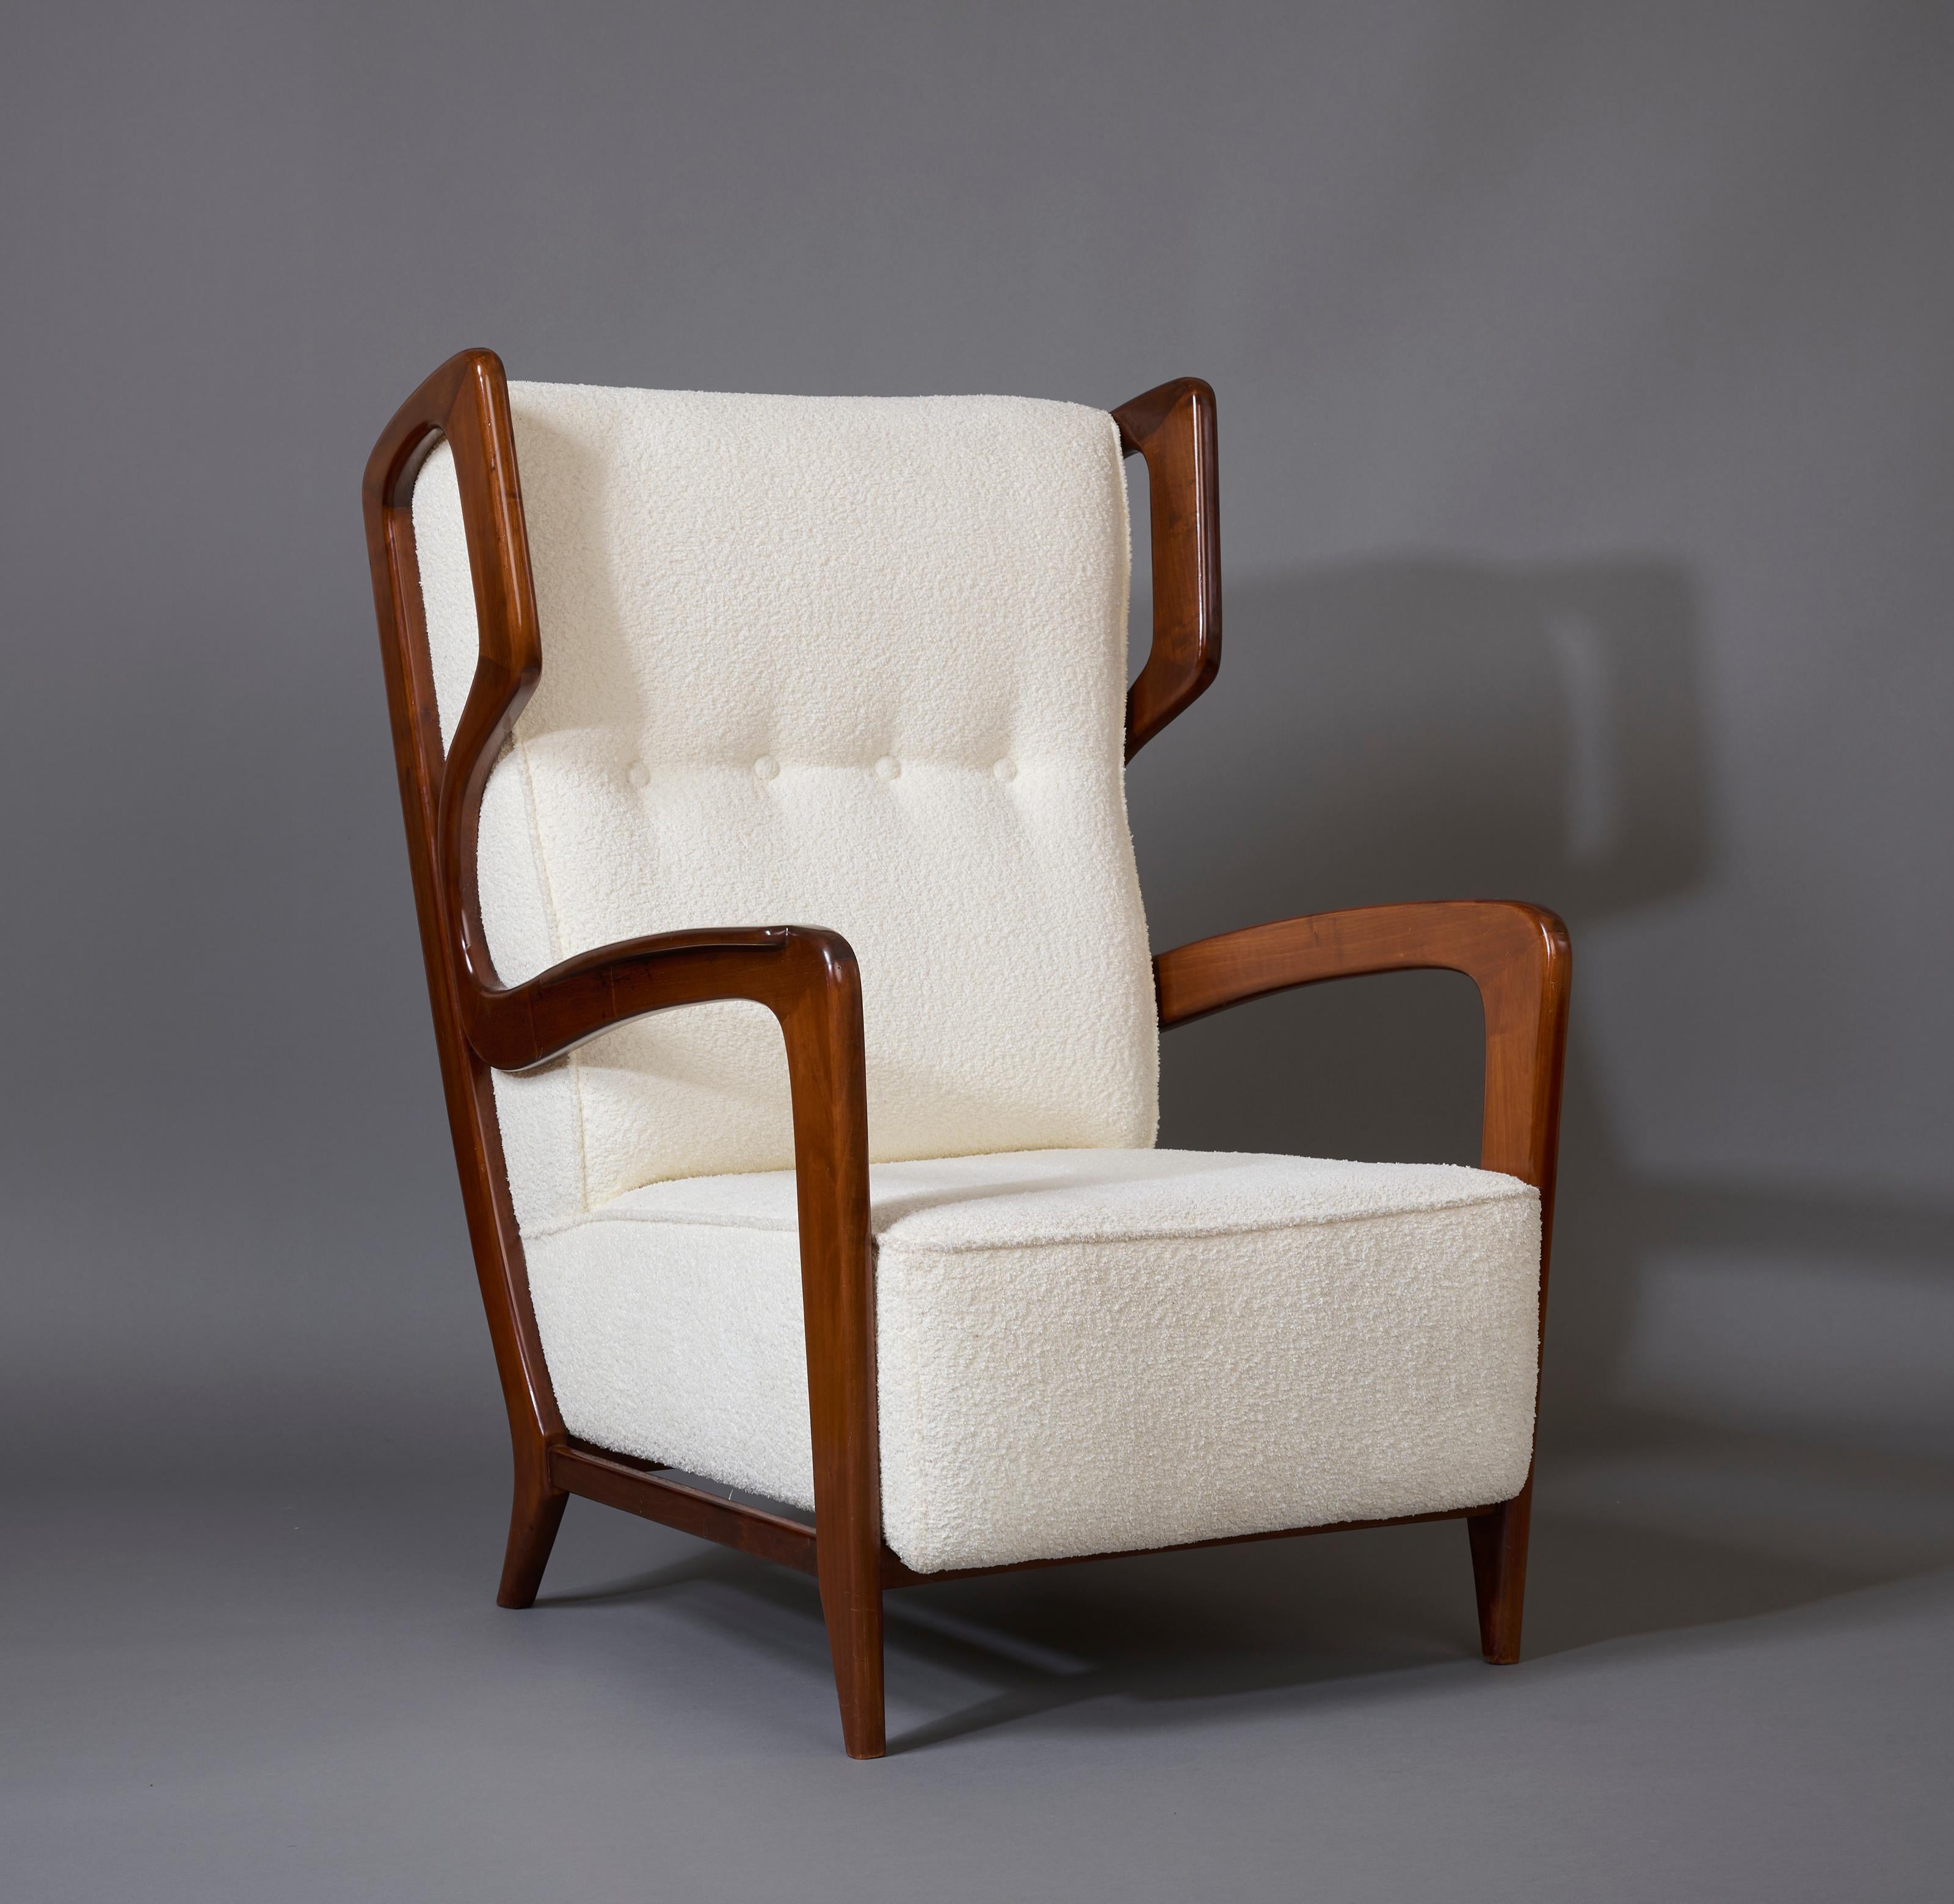 Gio Ponti, Exceptional Pair of Rare Wingback Armchairs in Walnut, Italy, 1940s For Sale 1